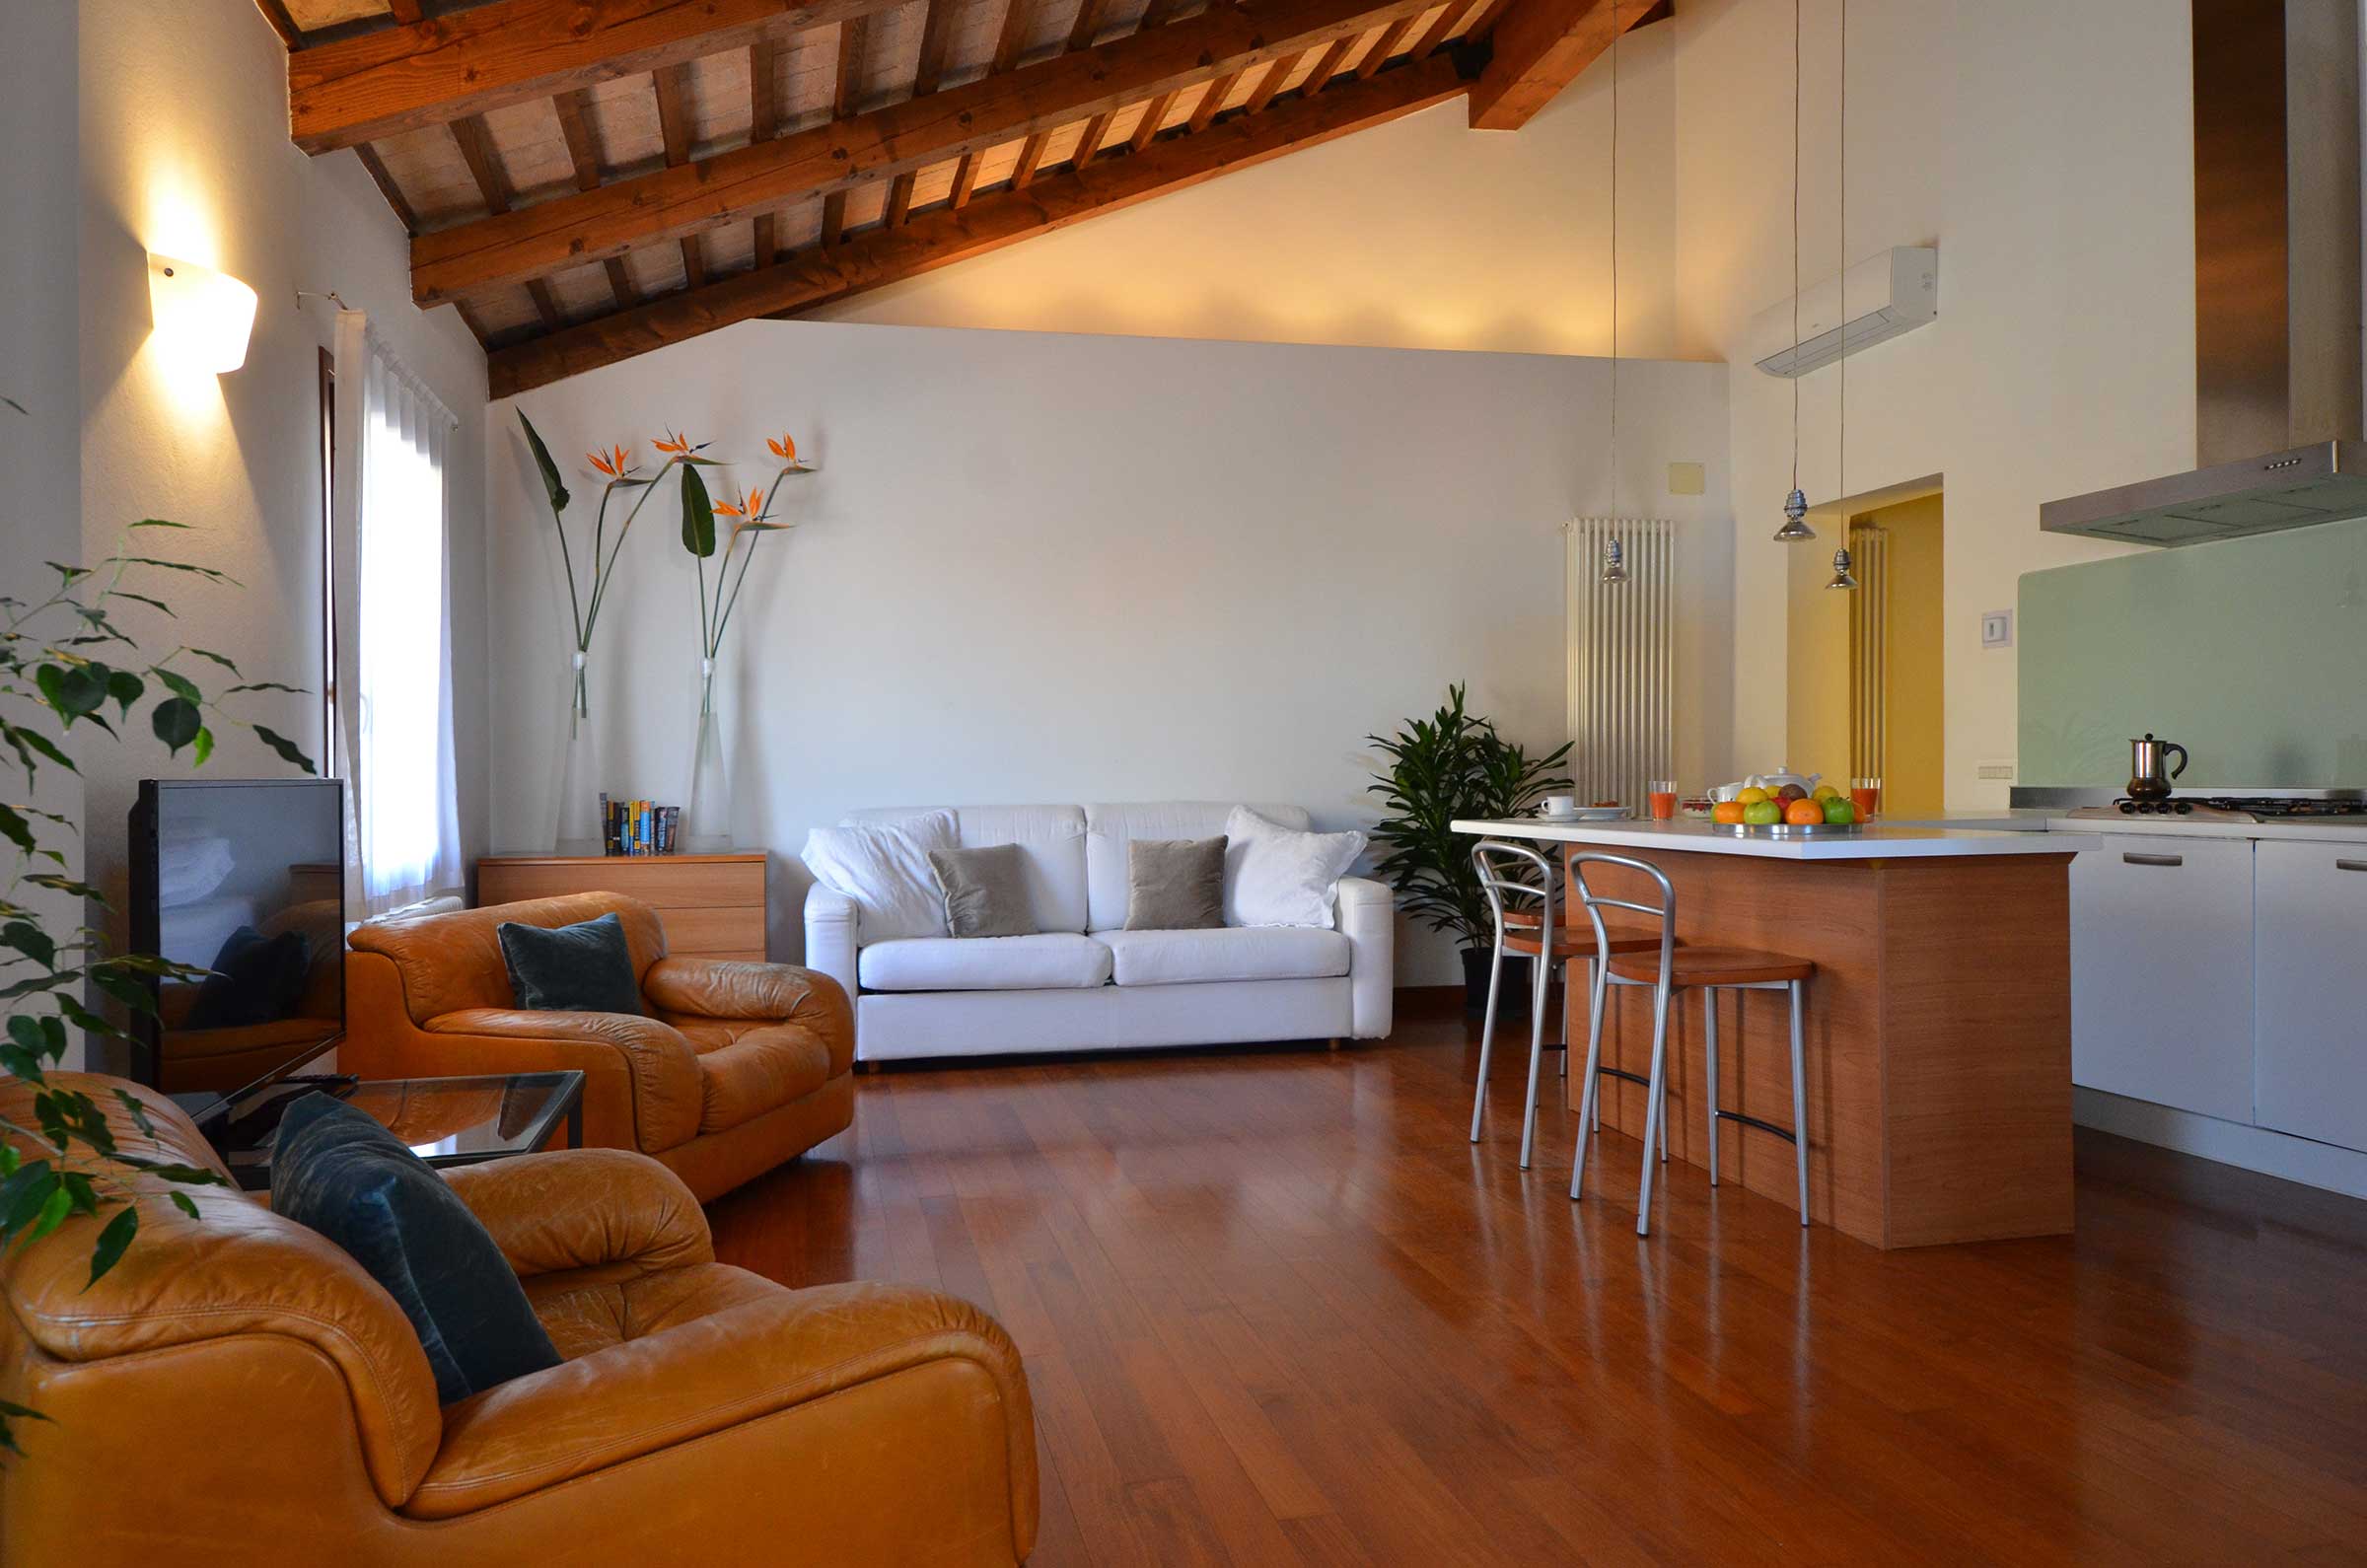 this loft is located centrally in a quiet spot away from the crowds